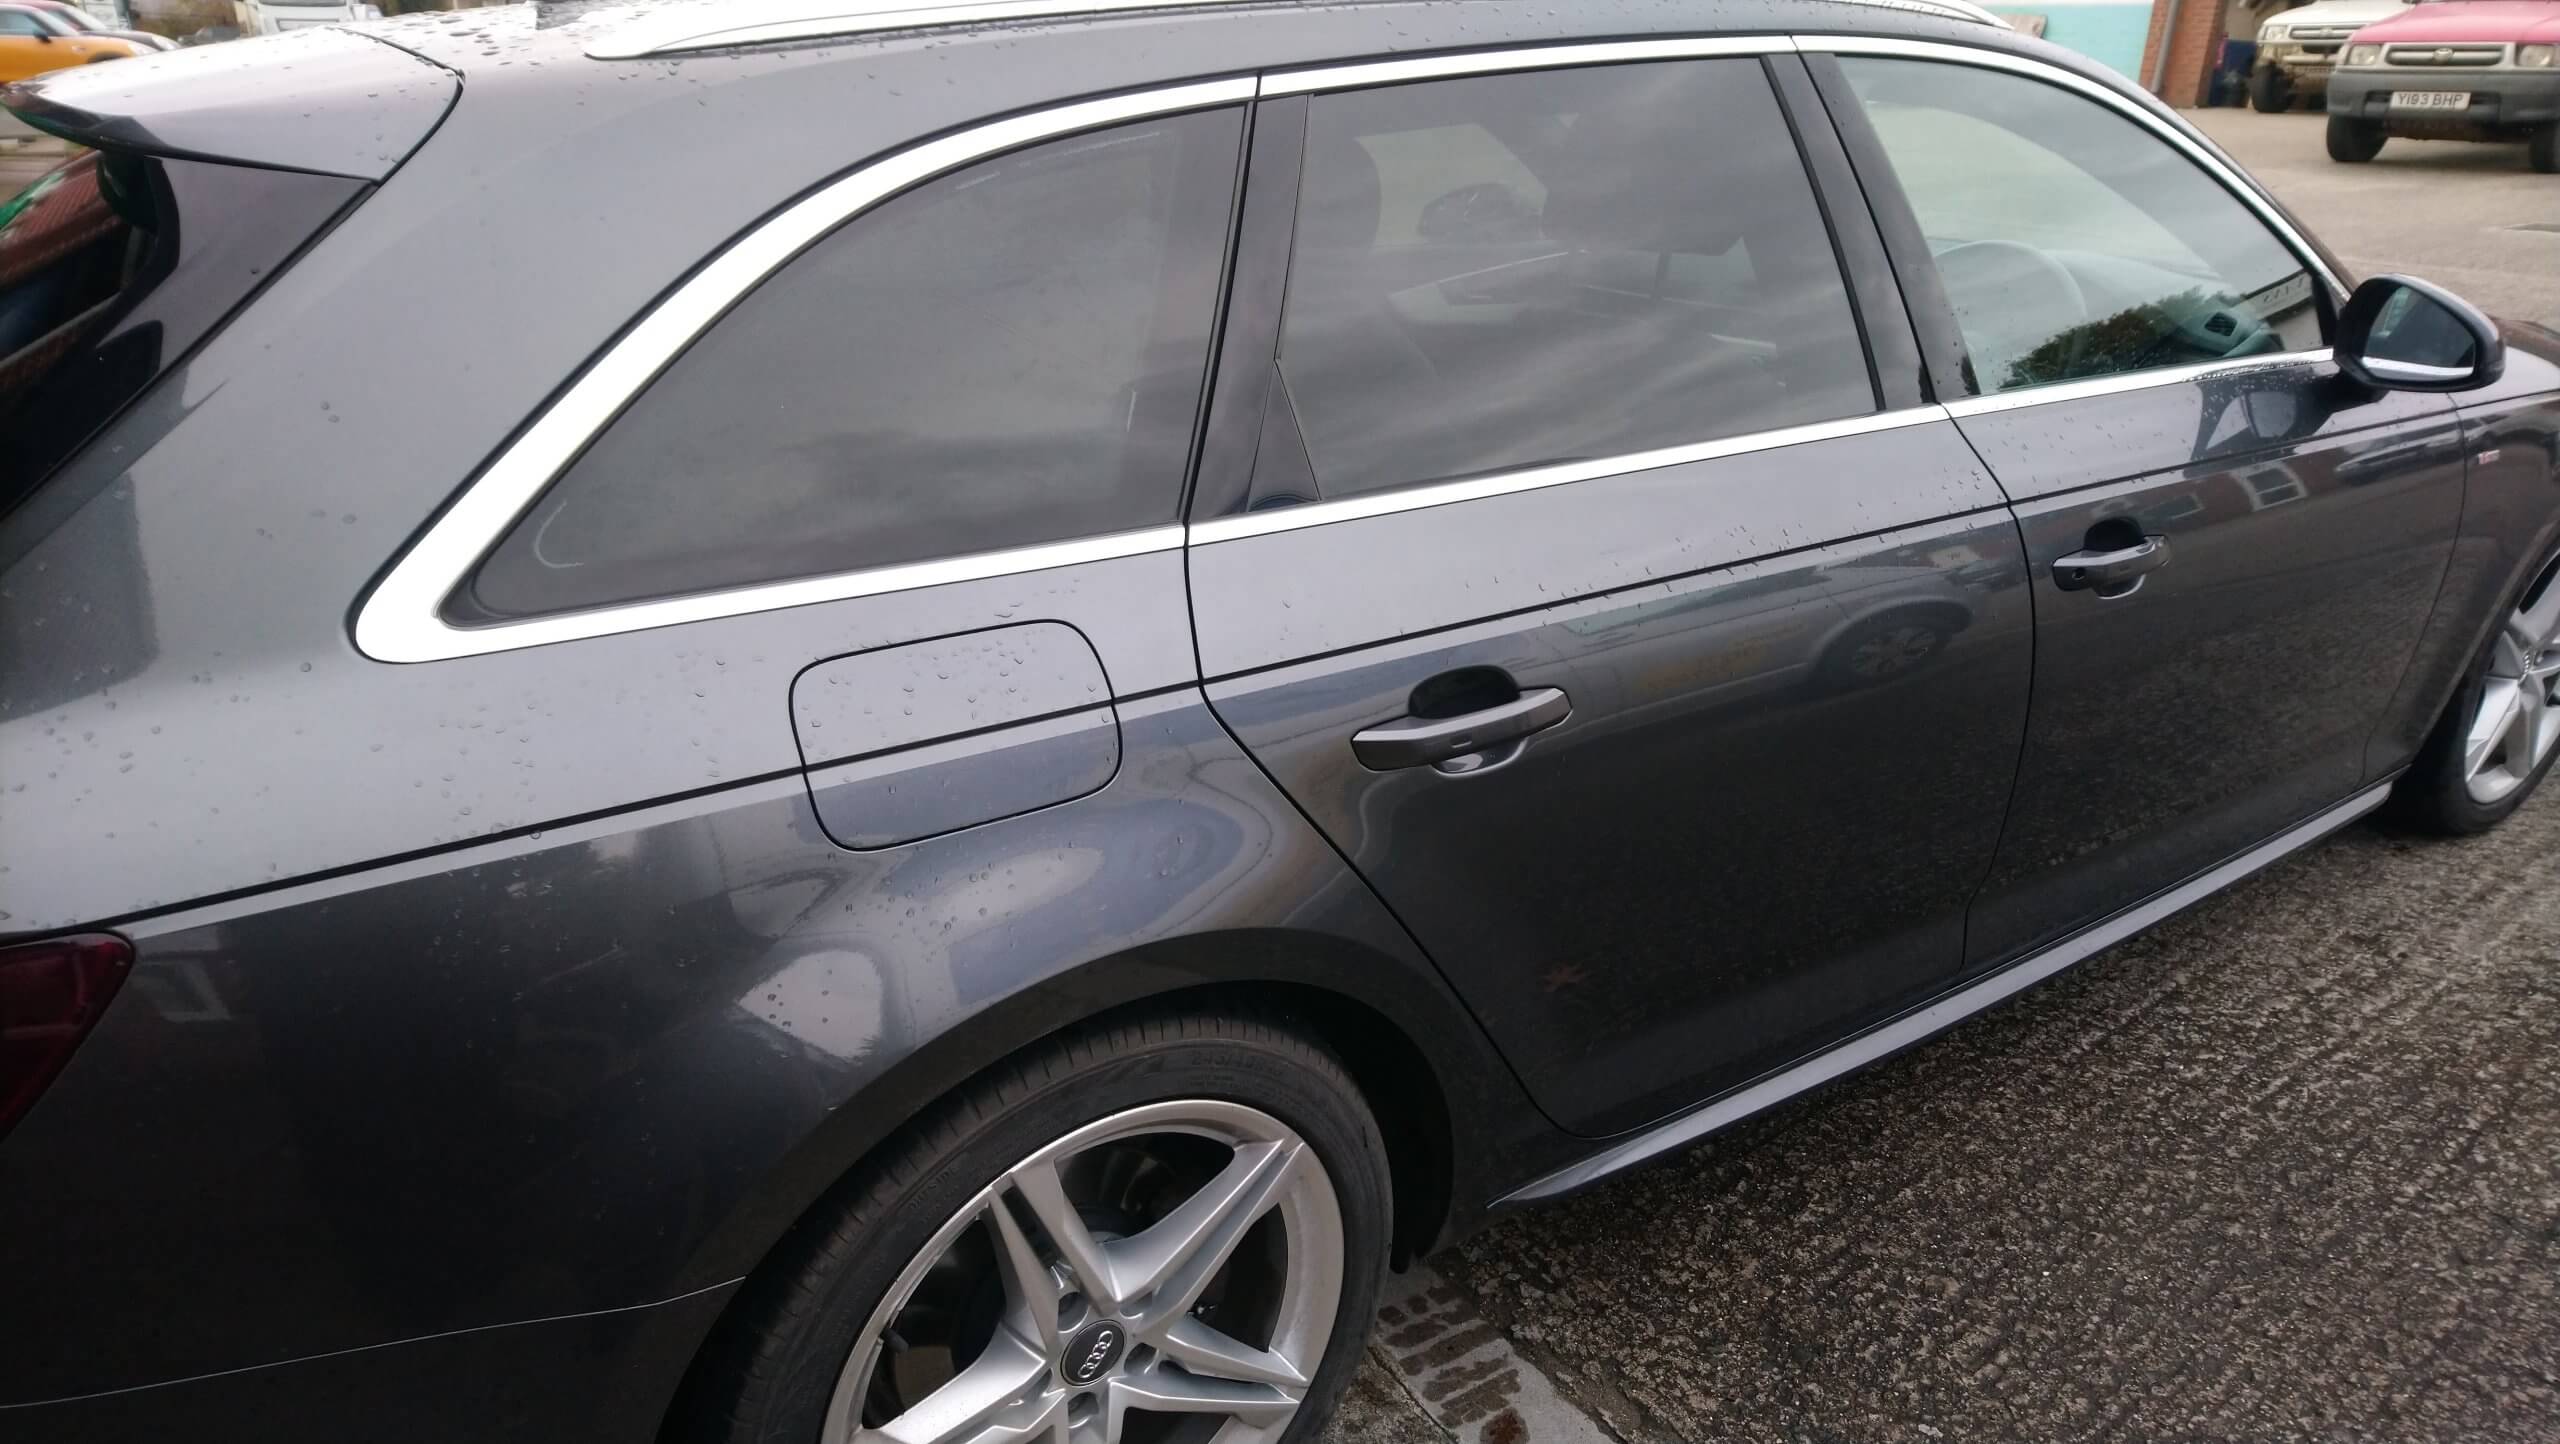 Audi A4 Avant window tinting with our high heat rejecting window film - 18 grade. Fitted by Tinting Express Barnstaple